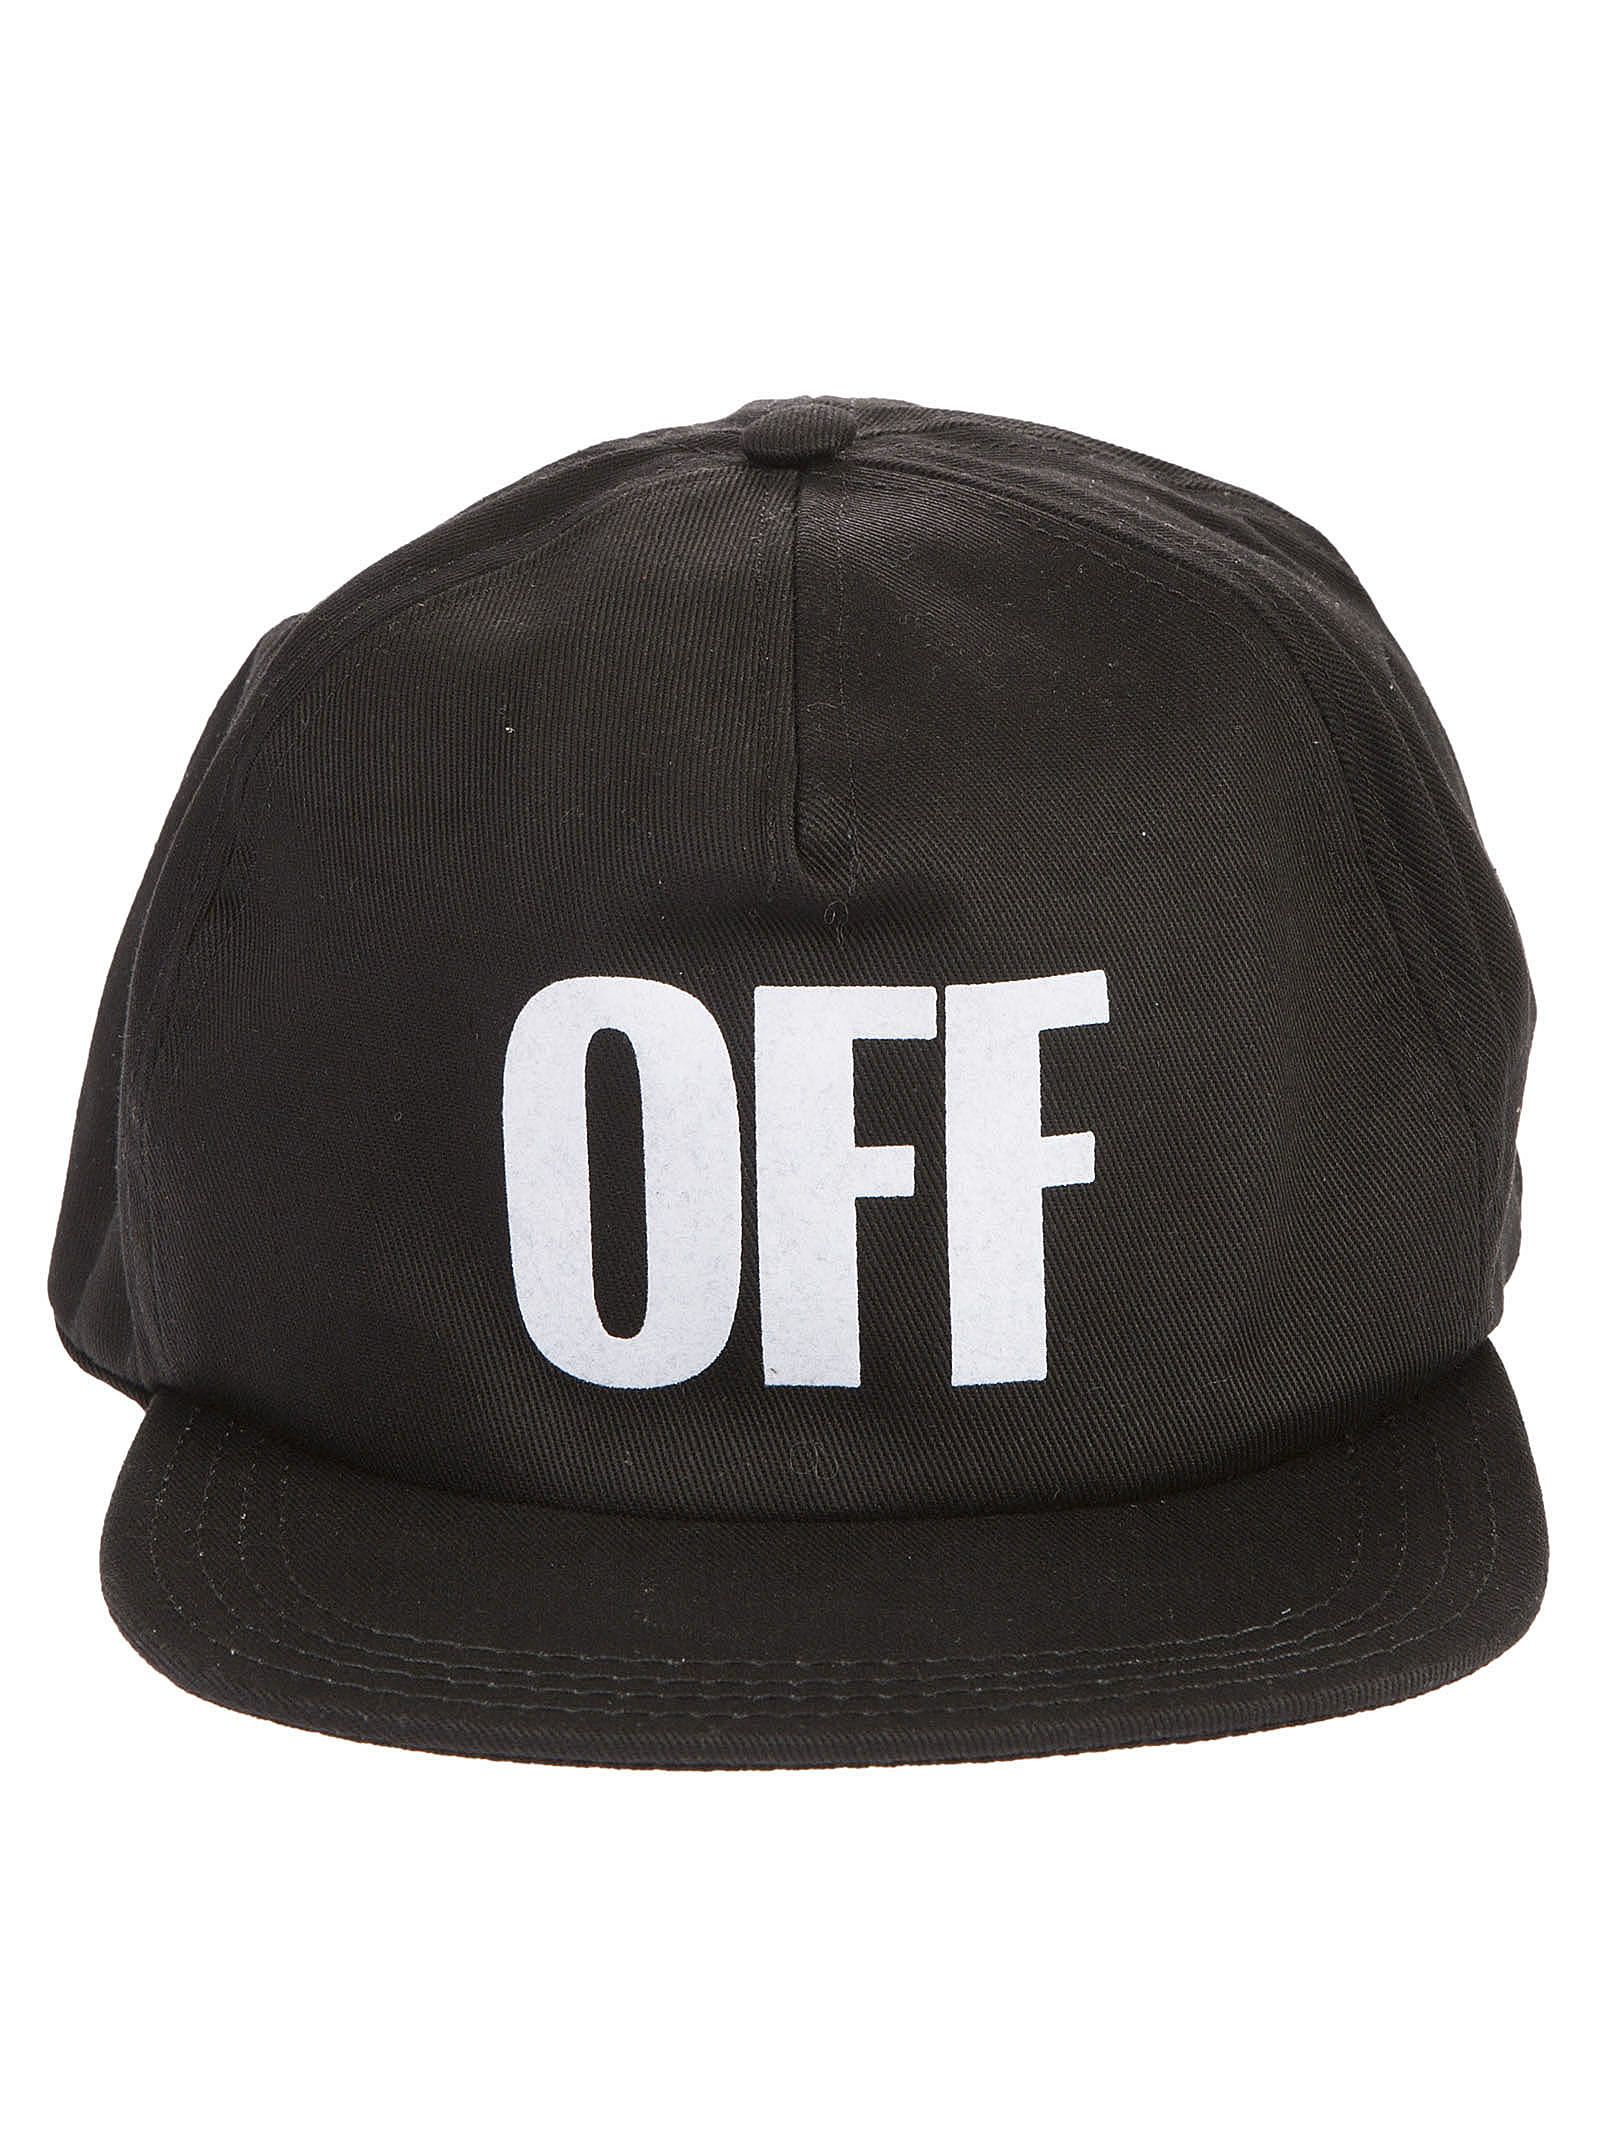 Off-White - Off-white Embroidered Logo Cap - Black, Women's Hats | Italist